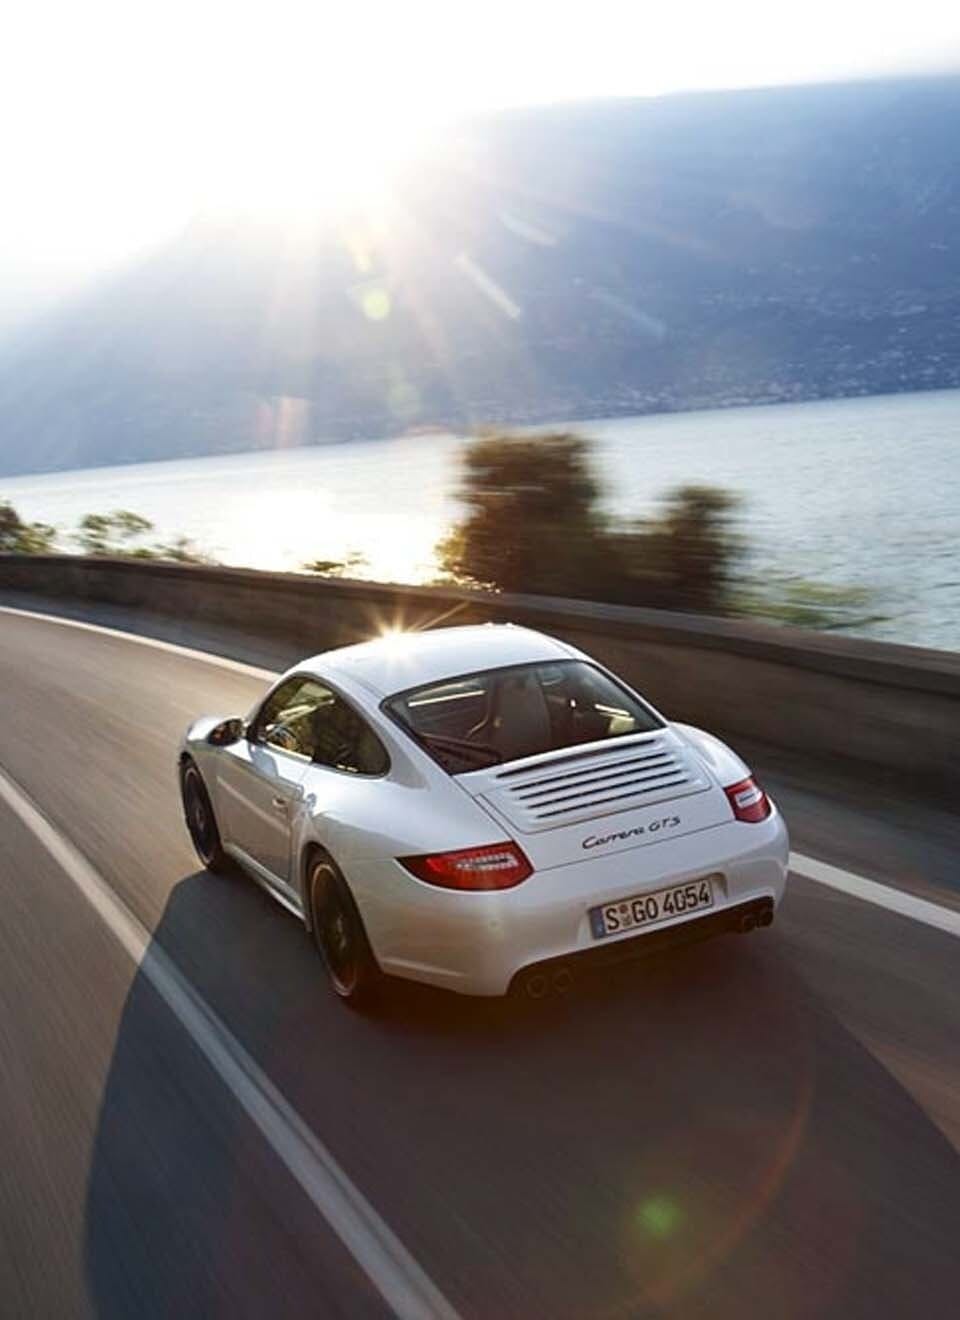 Buying a Porsche 997? Six things you need to know